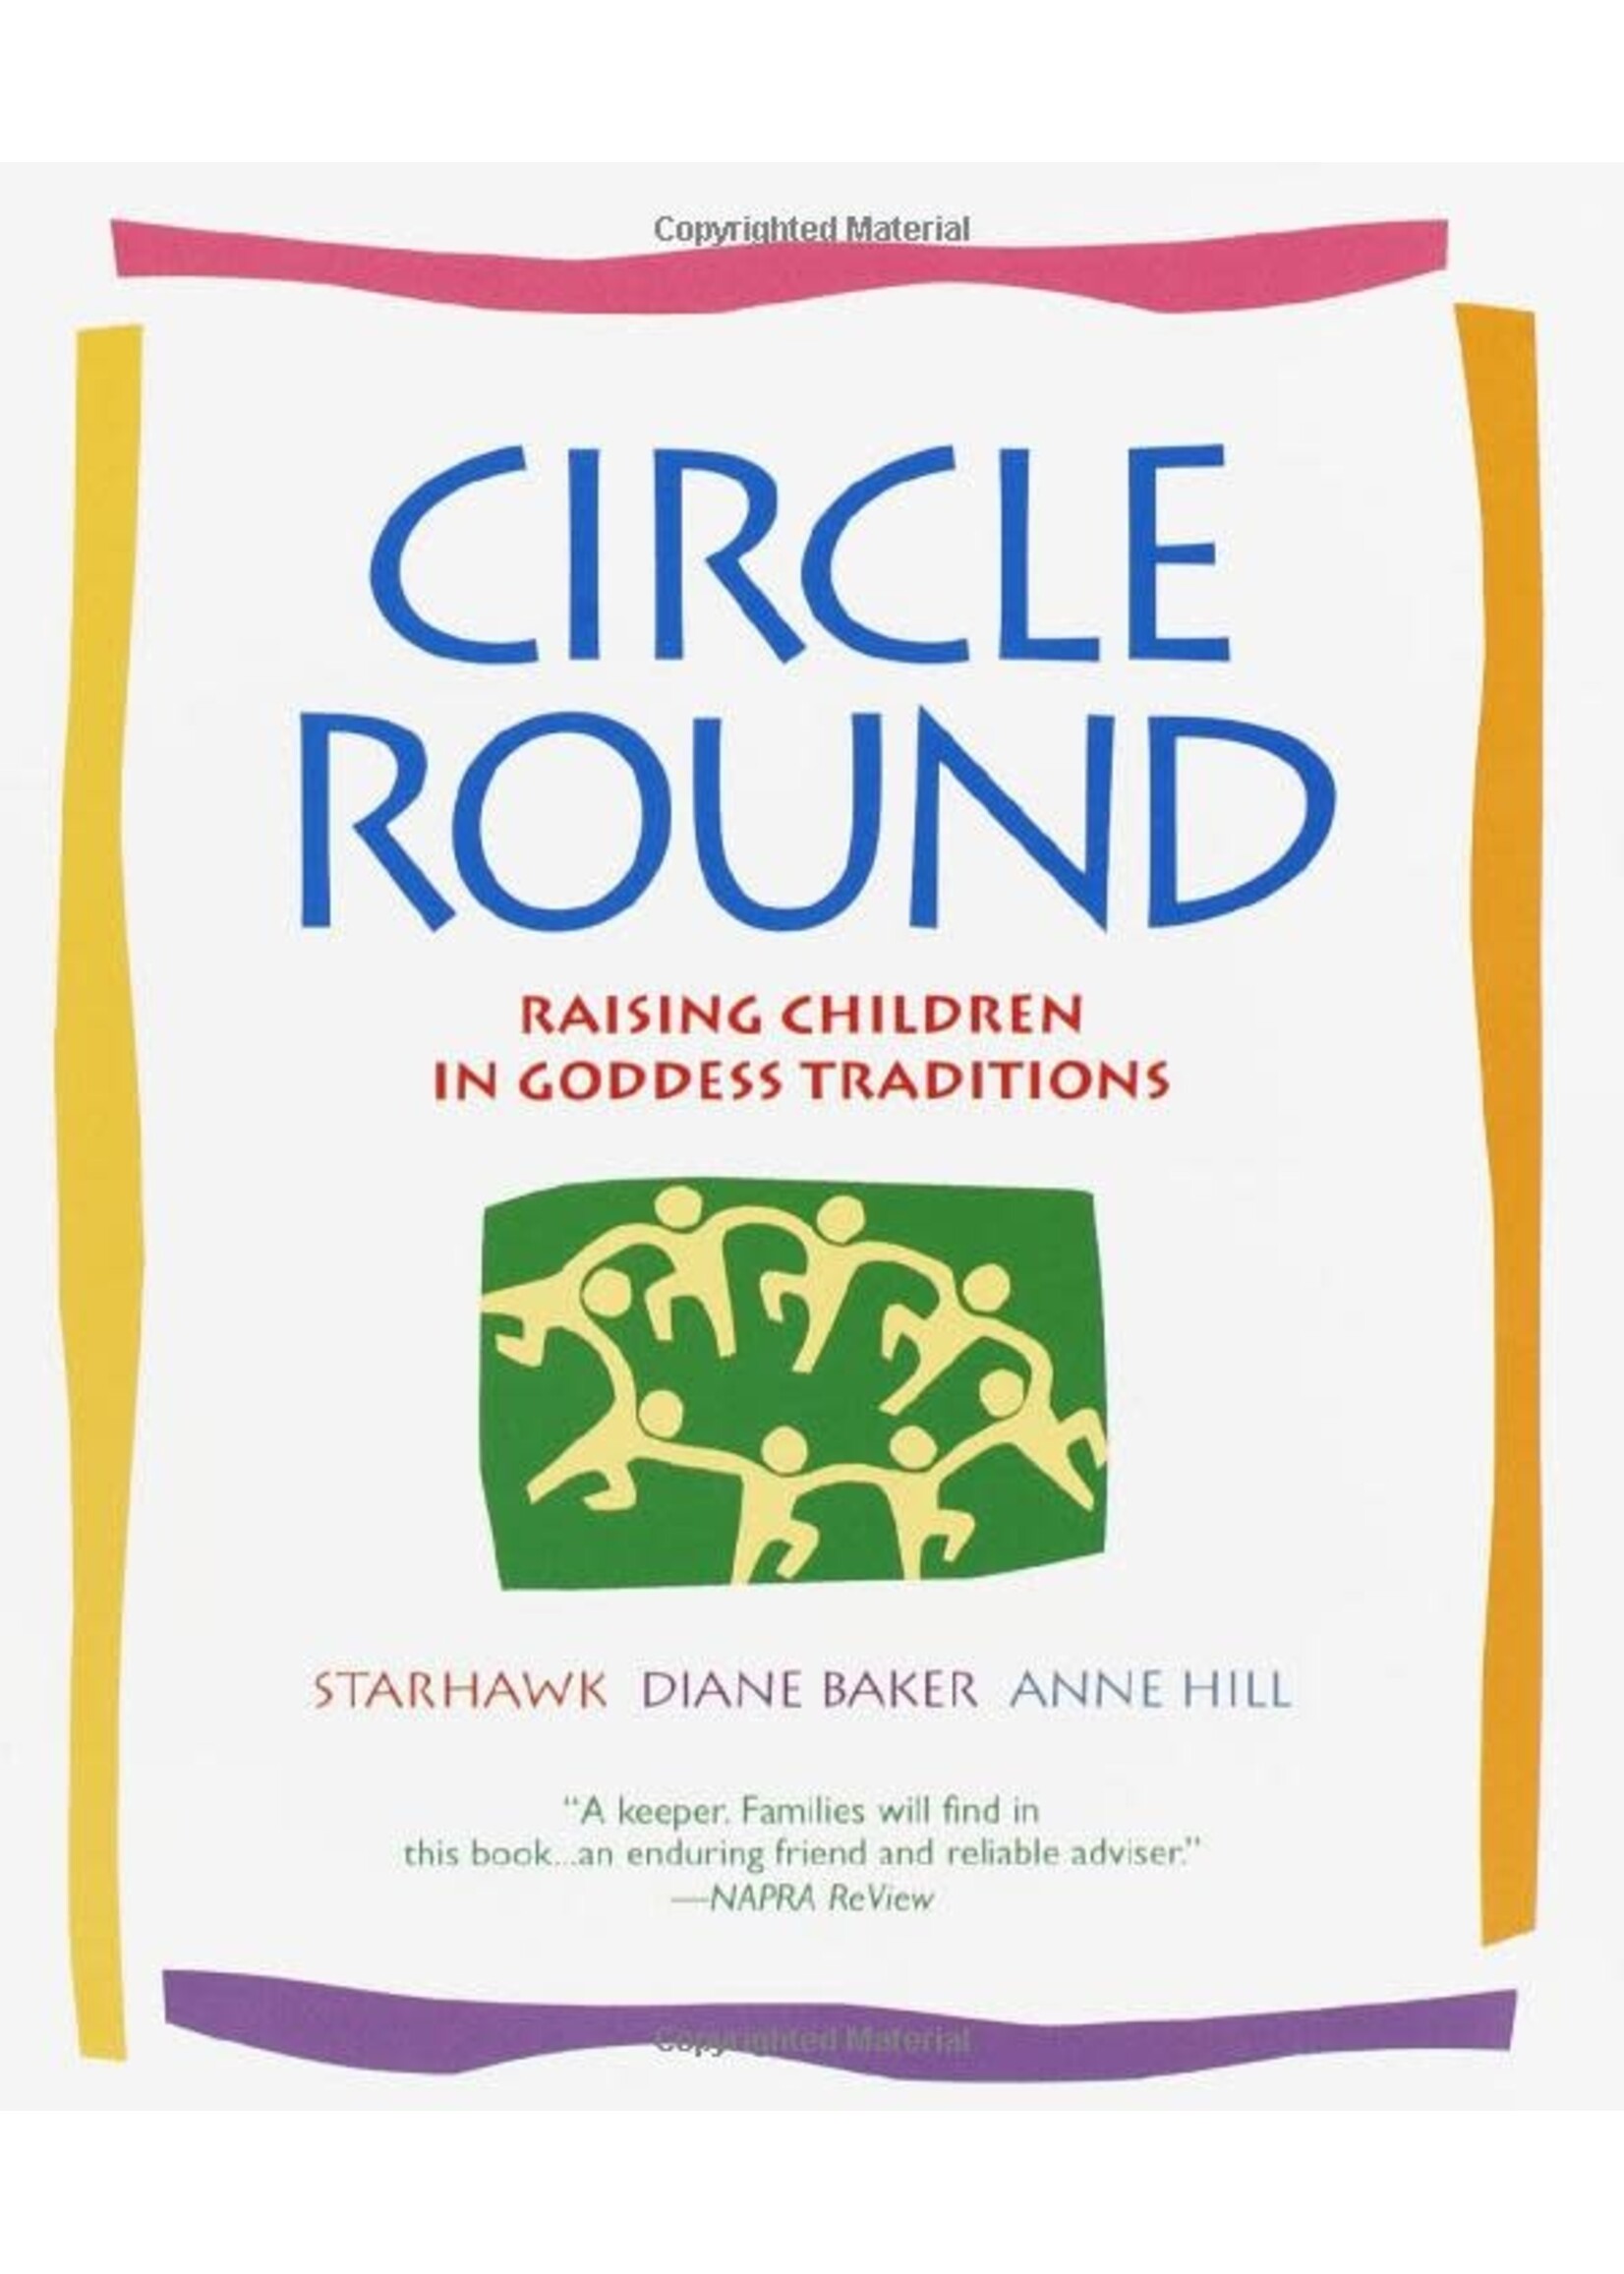 Circle Round by Starhawk, Diane Baker, and Anne Hill